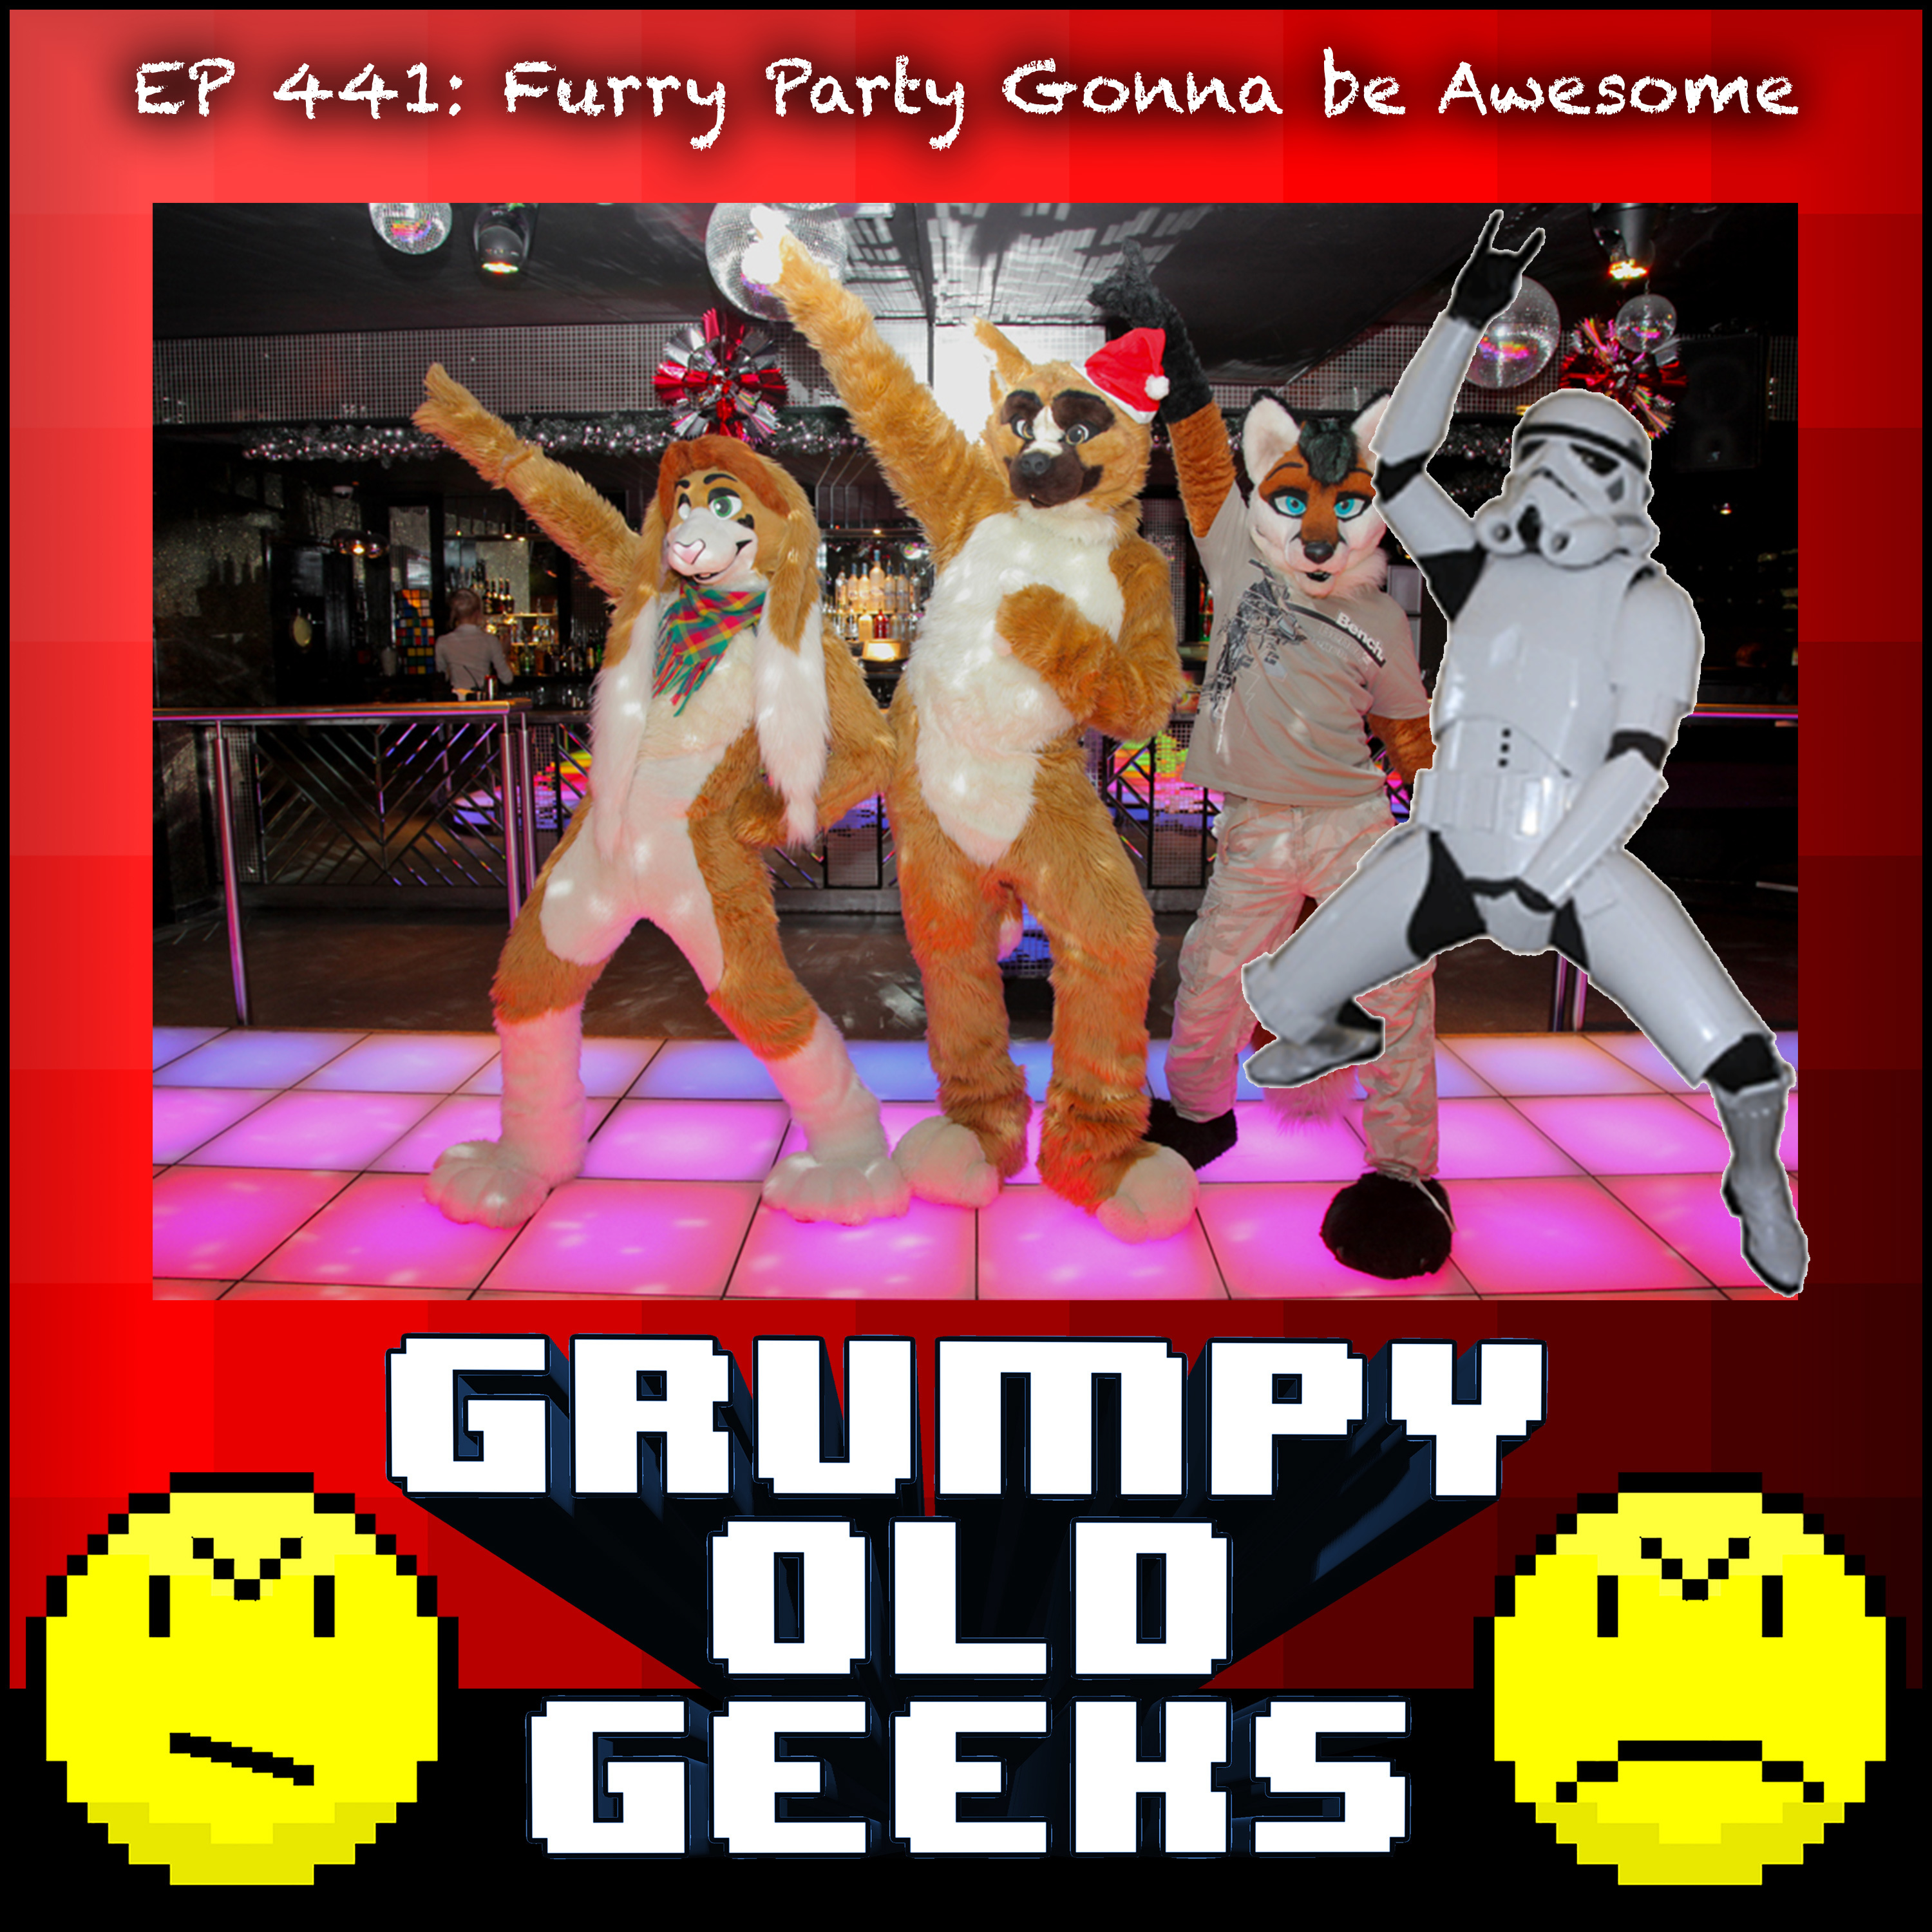 441: Furry Party Gonna be Awesome Image